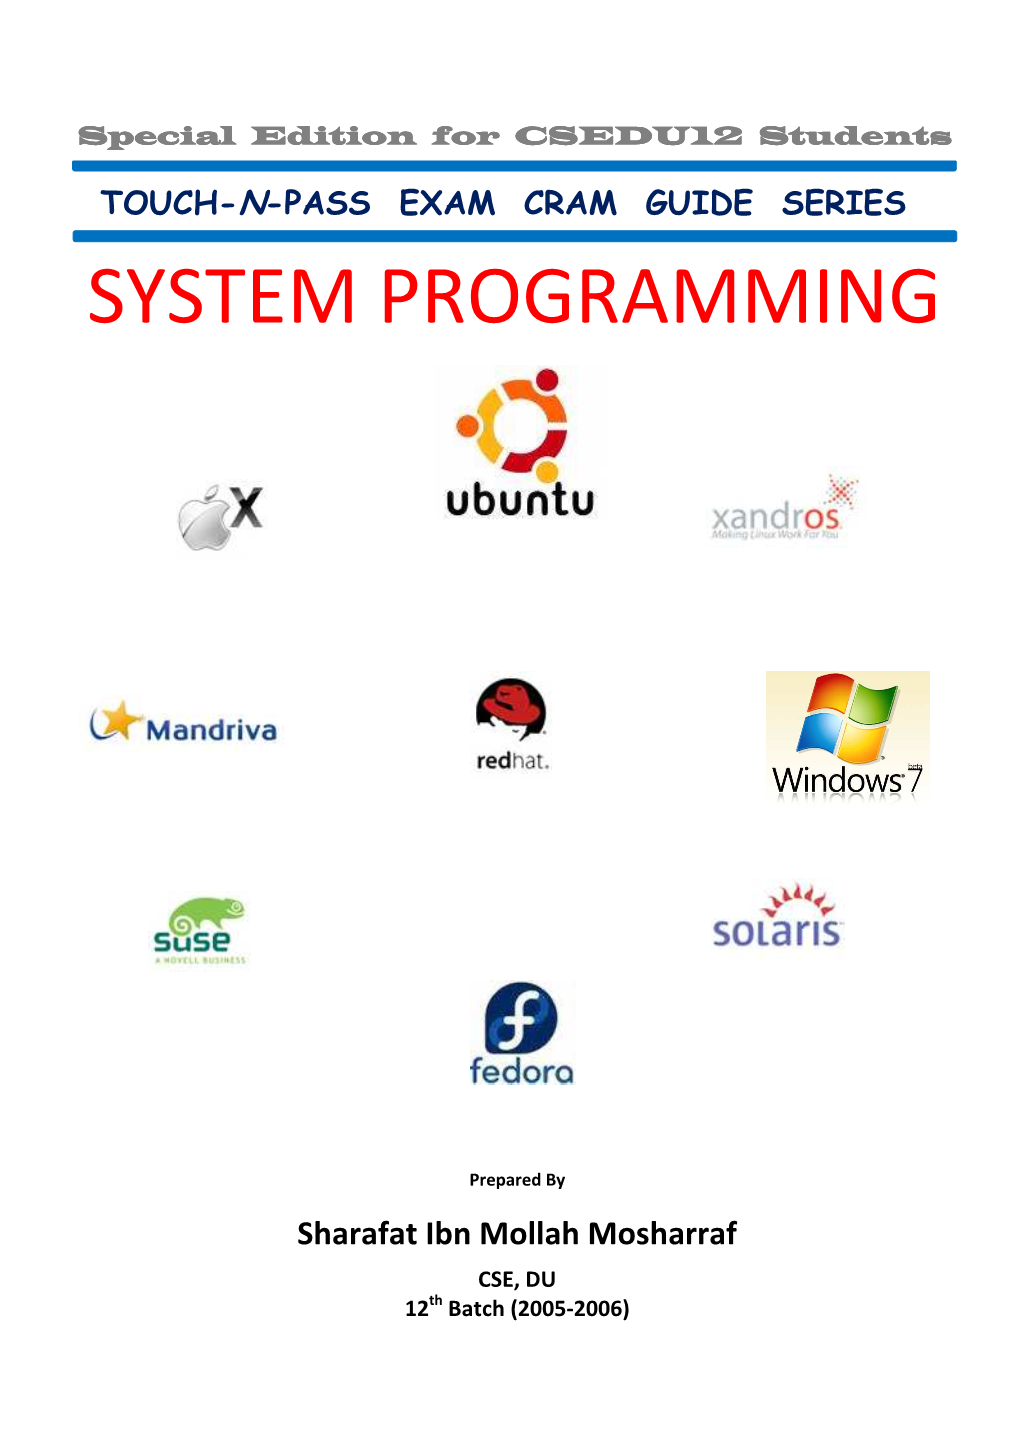 System Programming Guide